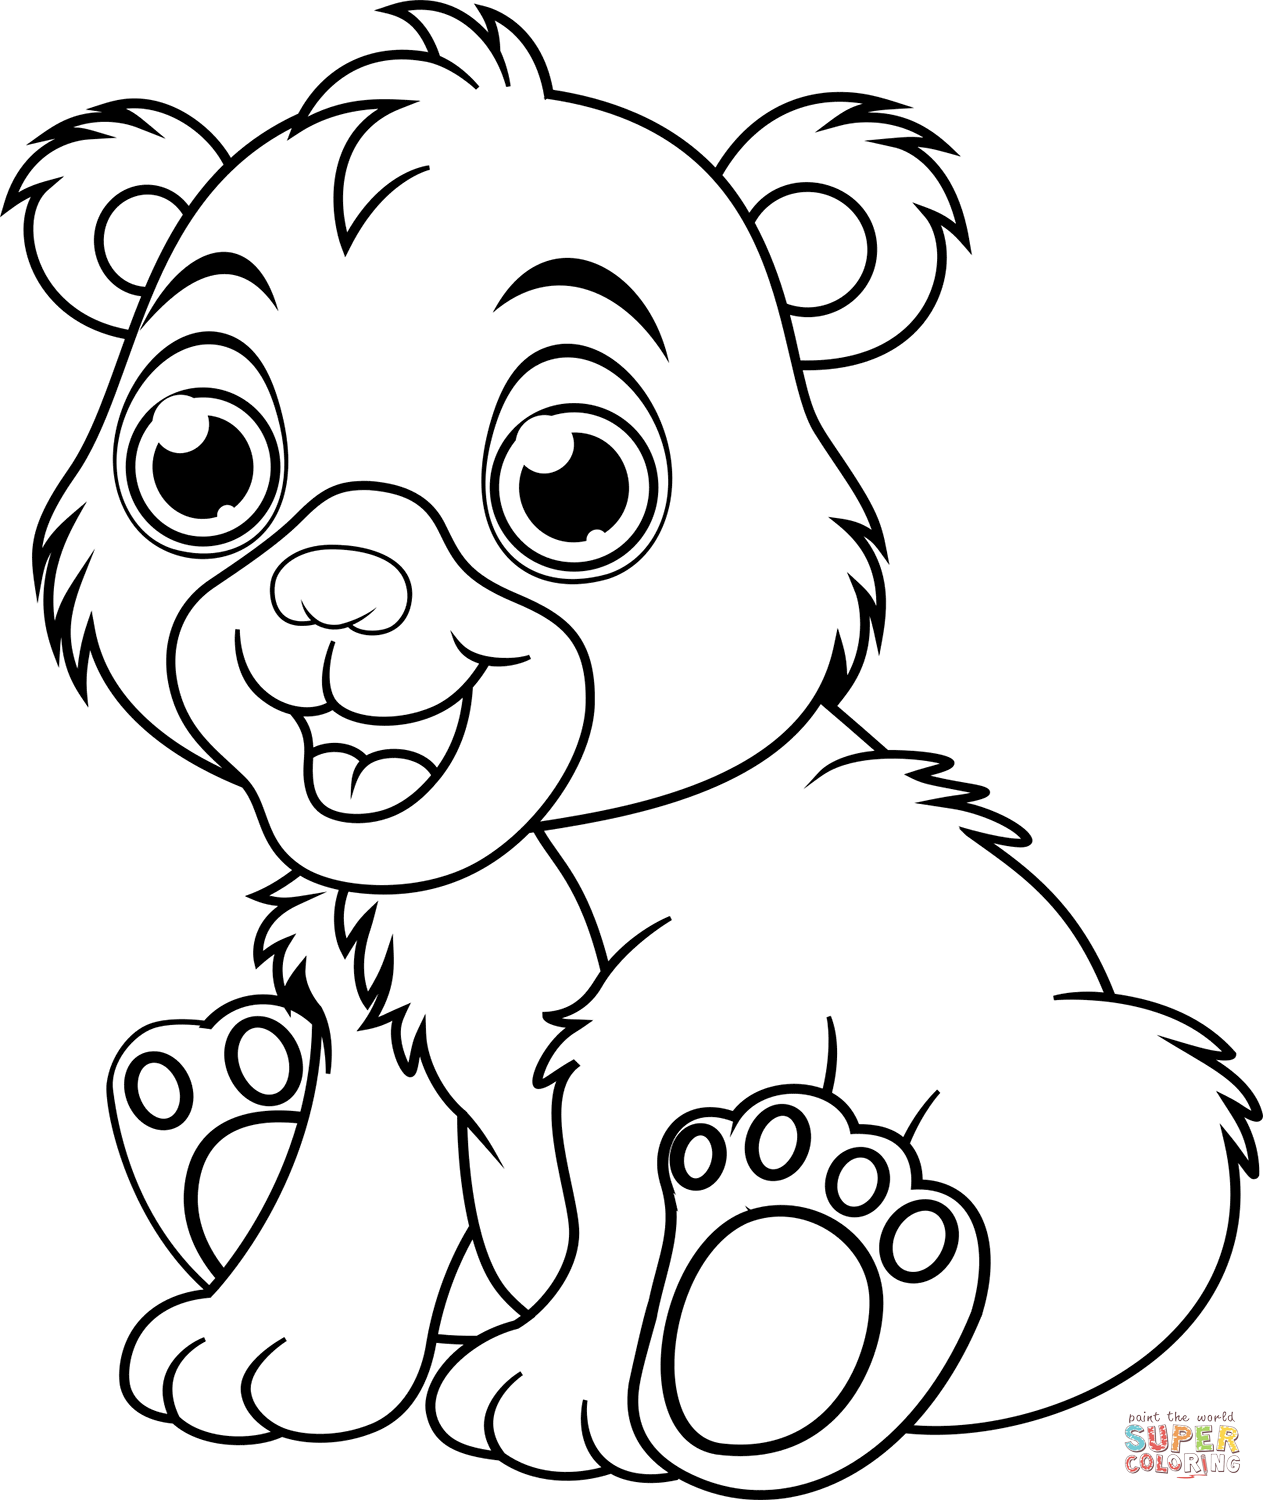 Cute baby lion coloring page free printable coloring pages